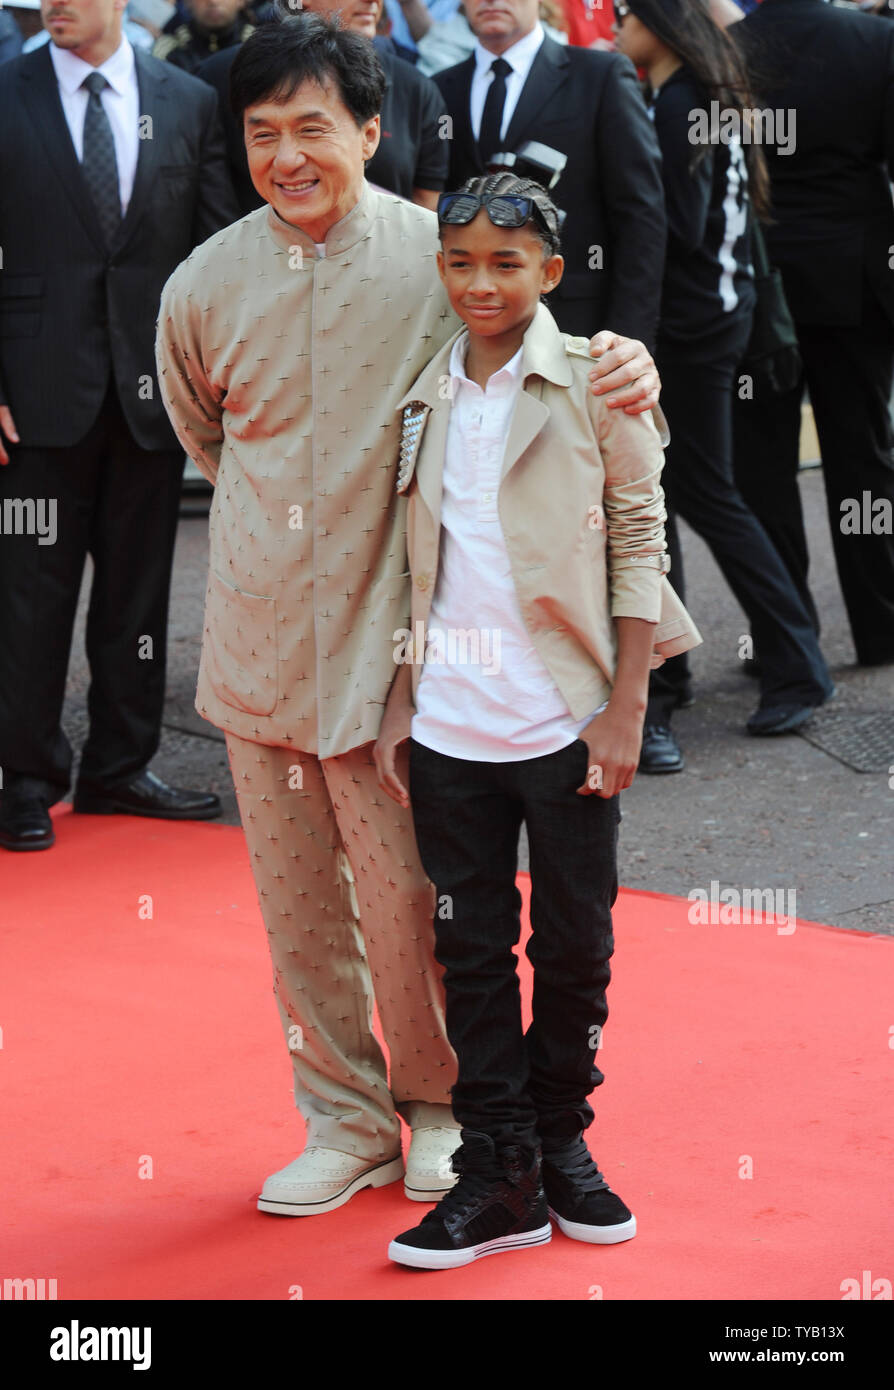 American actor  Jaden Smith and Hong Kong actor Jackie Chan attend the premiere of 'The Karate Kid' at Odeon, Leicester Square in London on July 15, 2010.     UPI/Rune Hellestad Stock Photo